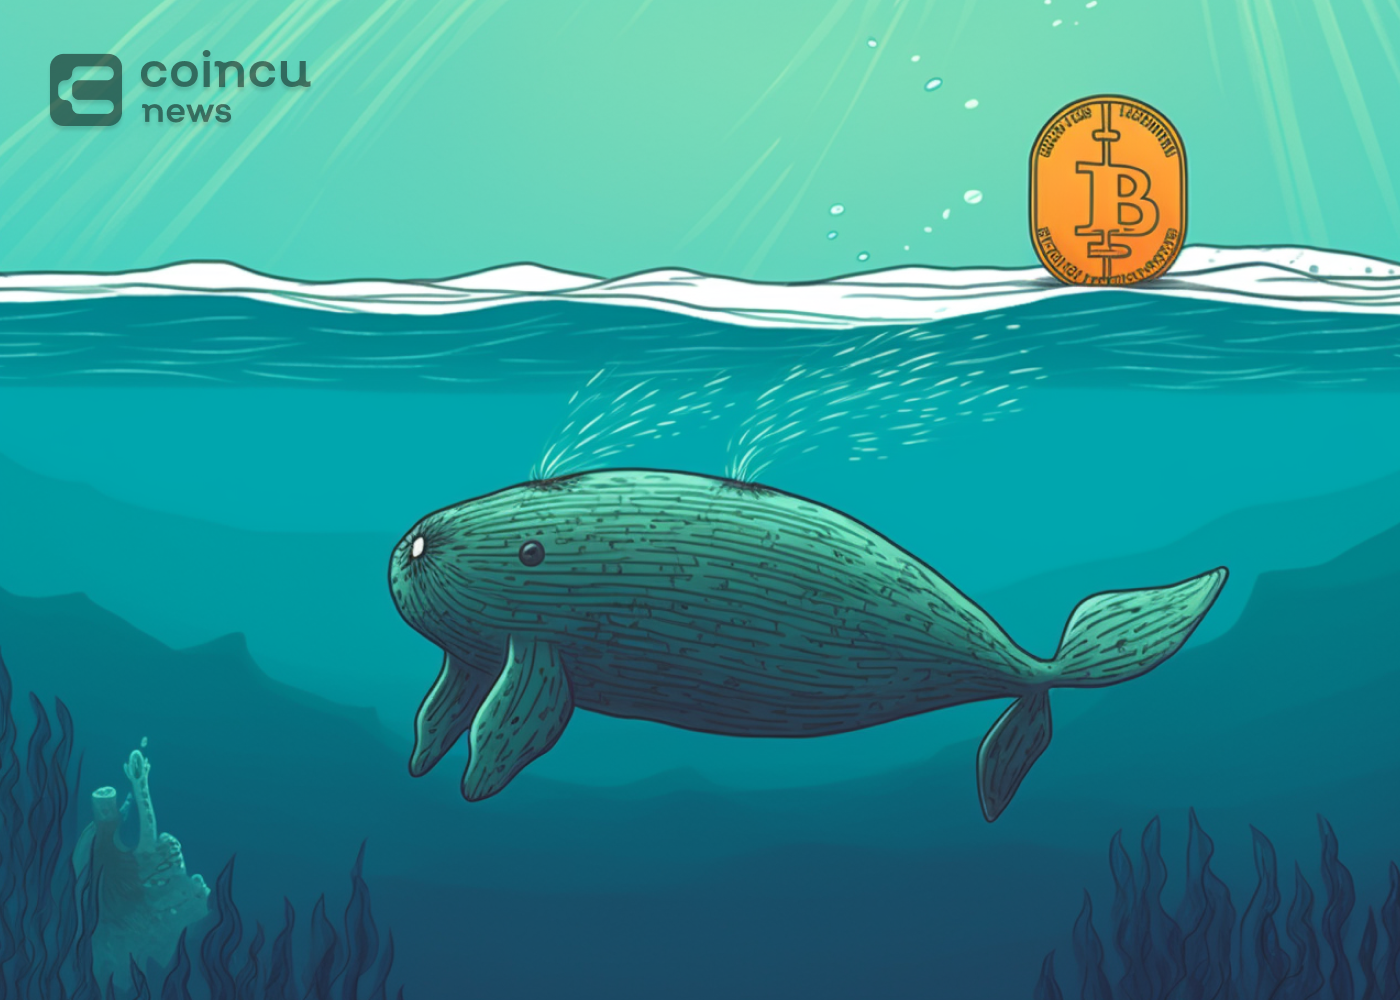 Dormant Bitcoin Whale Stirs To Life After 12.8 Years, Soaring Over 22,500-Fold In Value